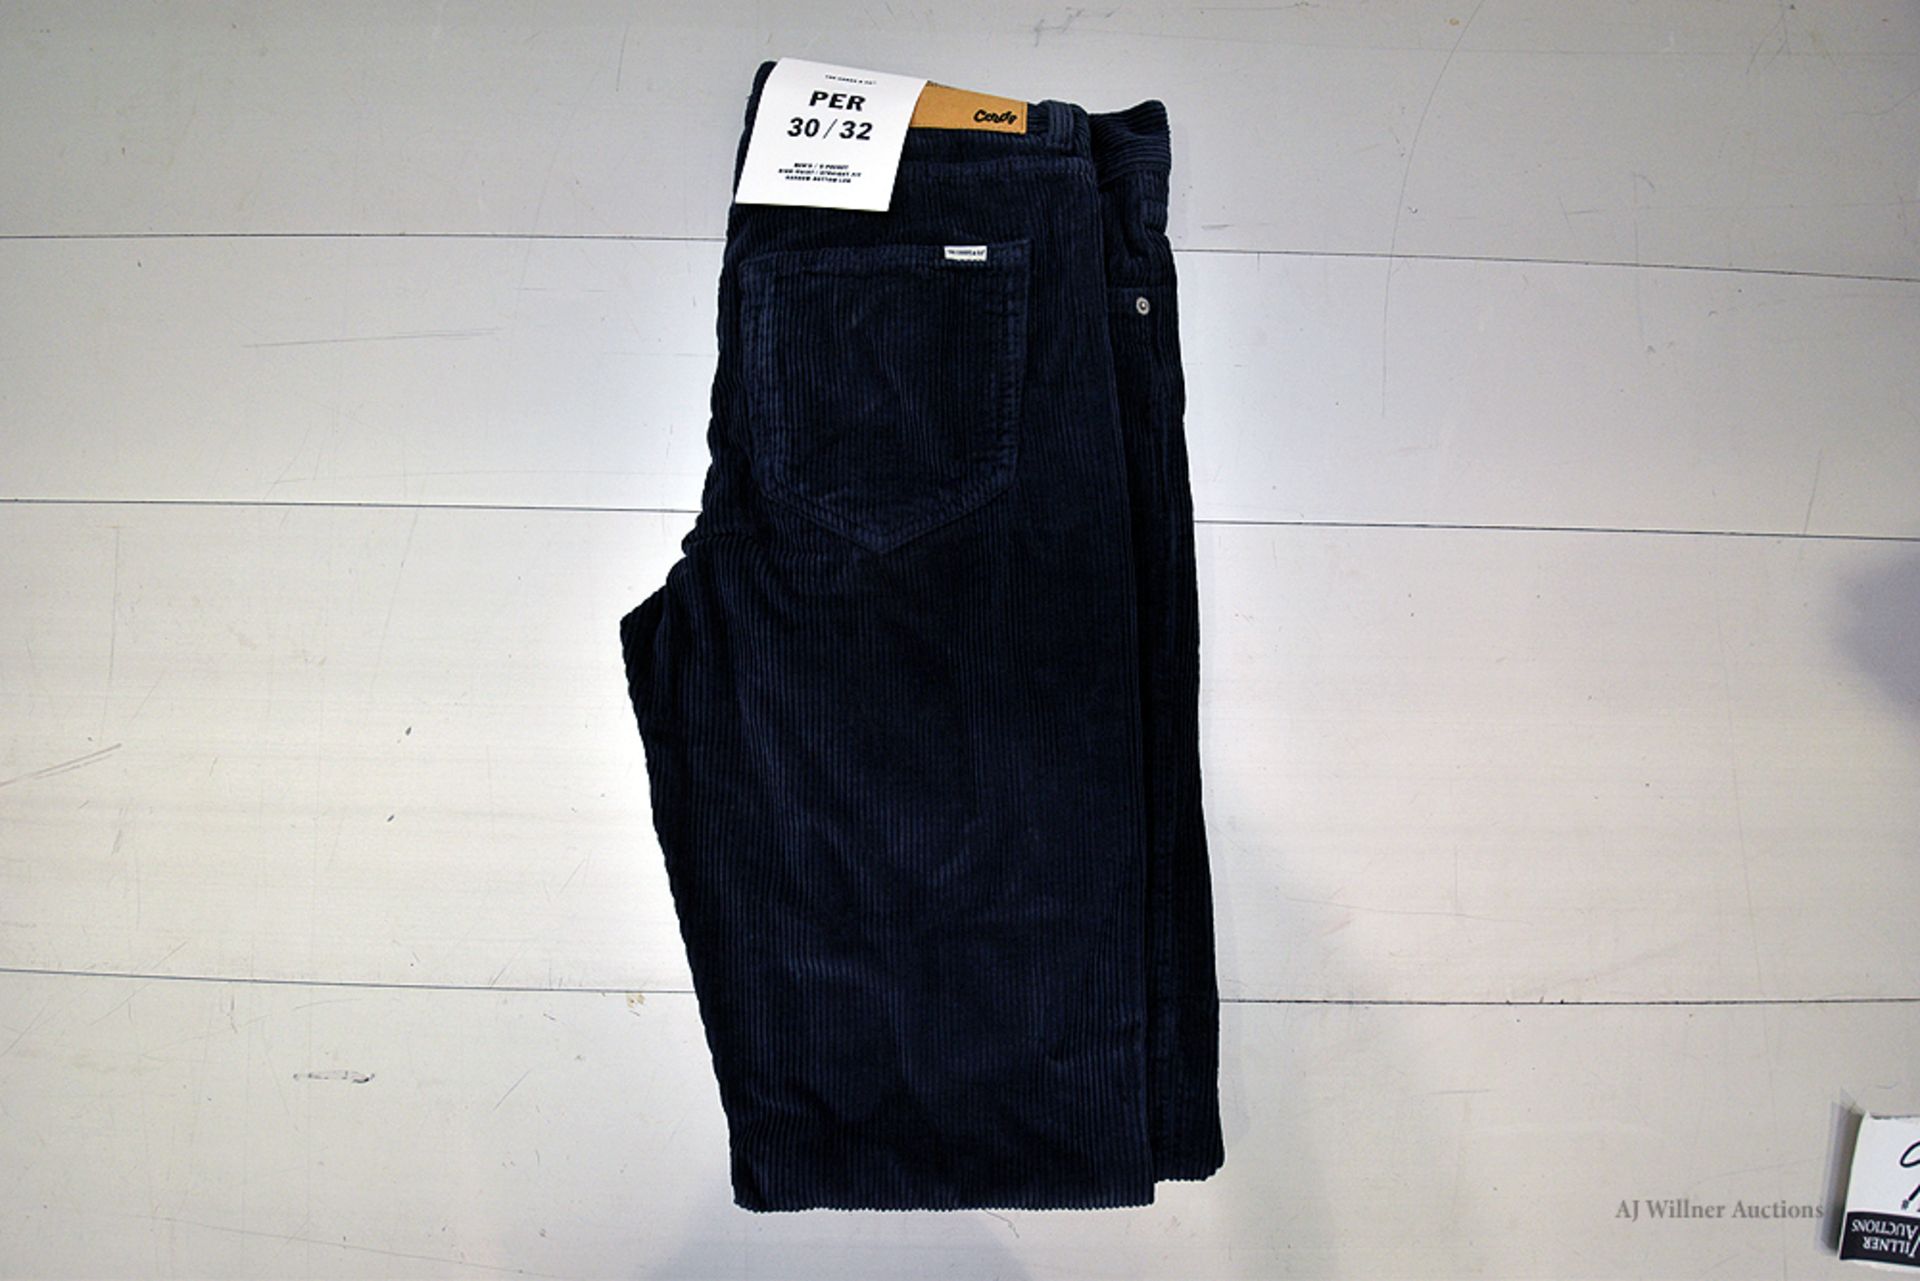 THE CORDS & CO. "PER" MEN'S/HIGH-WAIST/ STRAIGHT FIT/ NARROW LEG MSRP $160